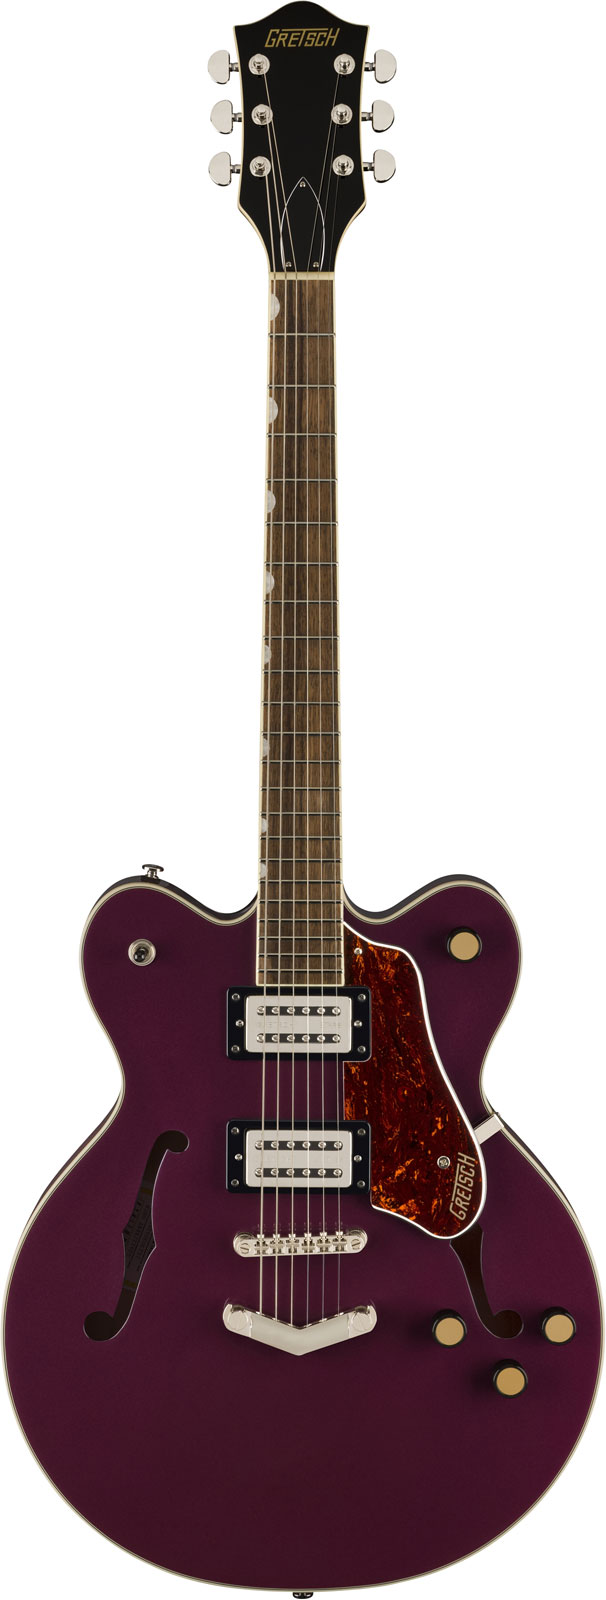 GRETSCH GUITARS G2622 STREAMLINER CENTER BLOCK DOUBLE-CUT WITH V-STOPTAIL LRL BROAD'TRON BT-3S PICKUPS BURNT ORCHID